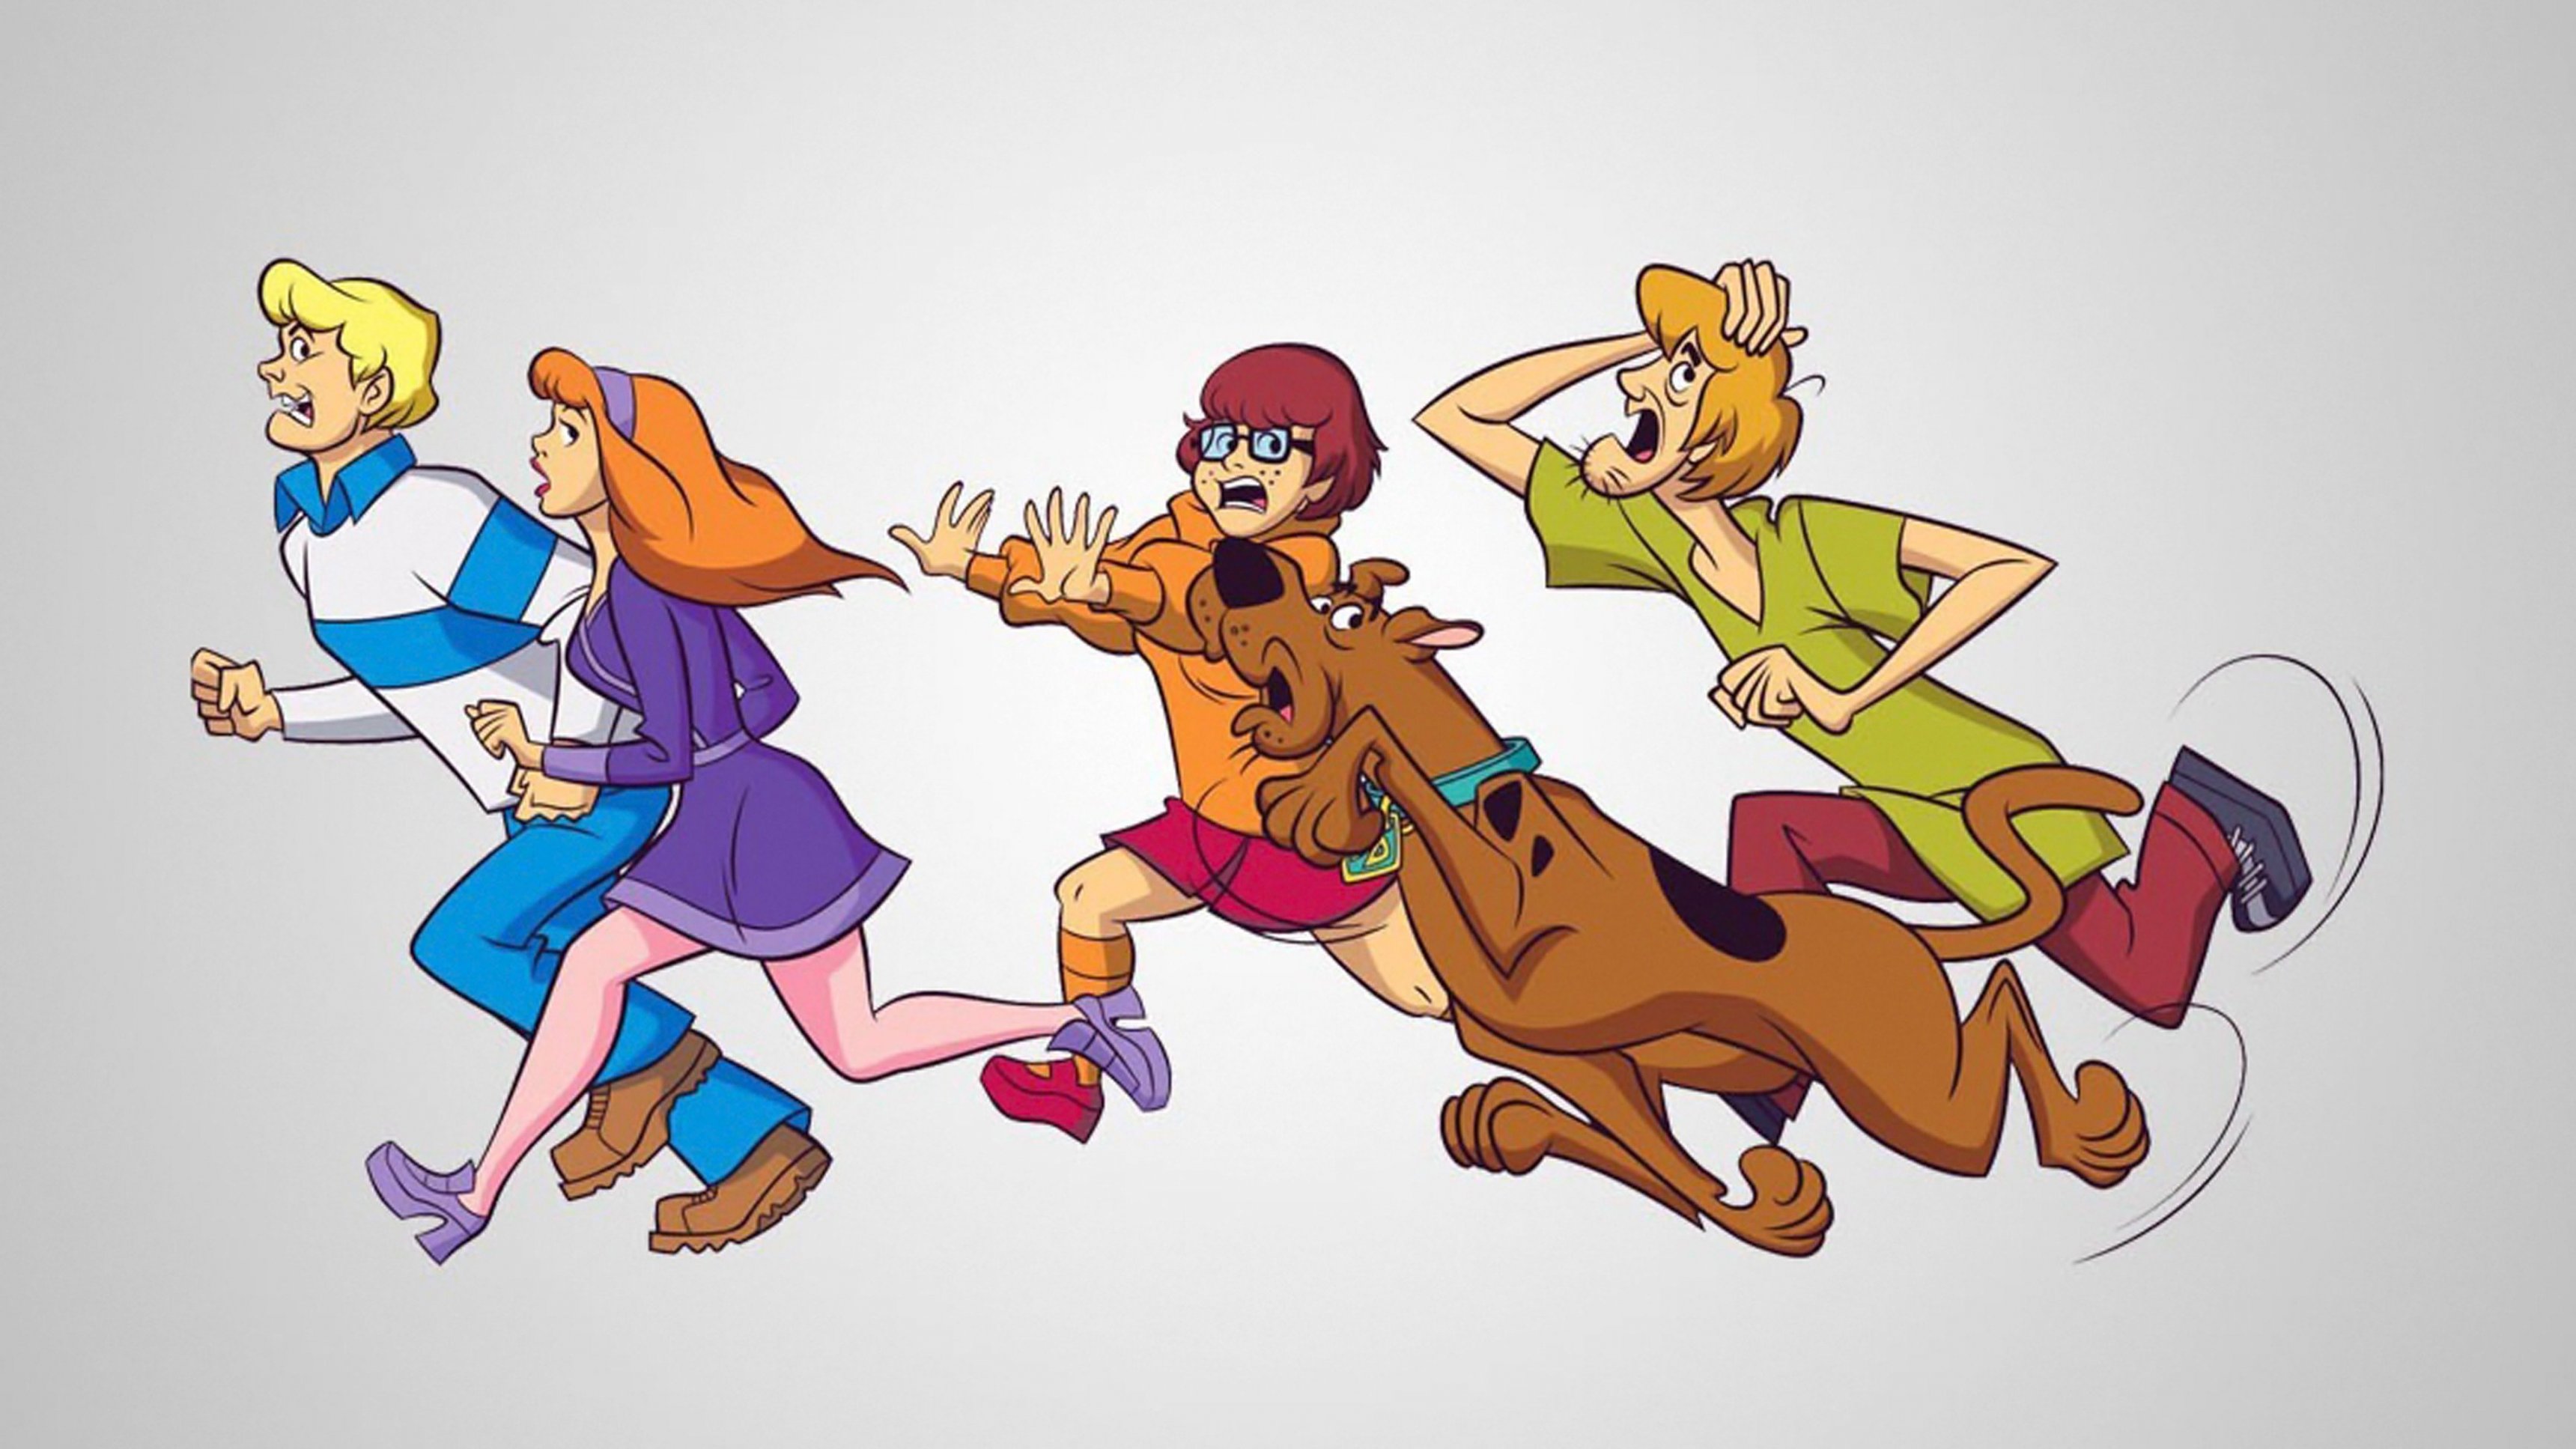 Scooby Doo and the Safari Creatures - sv.tal